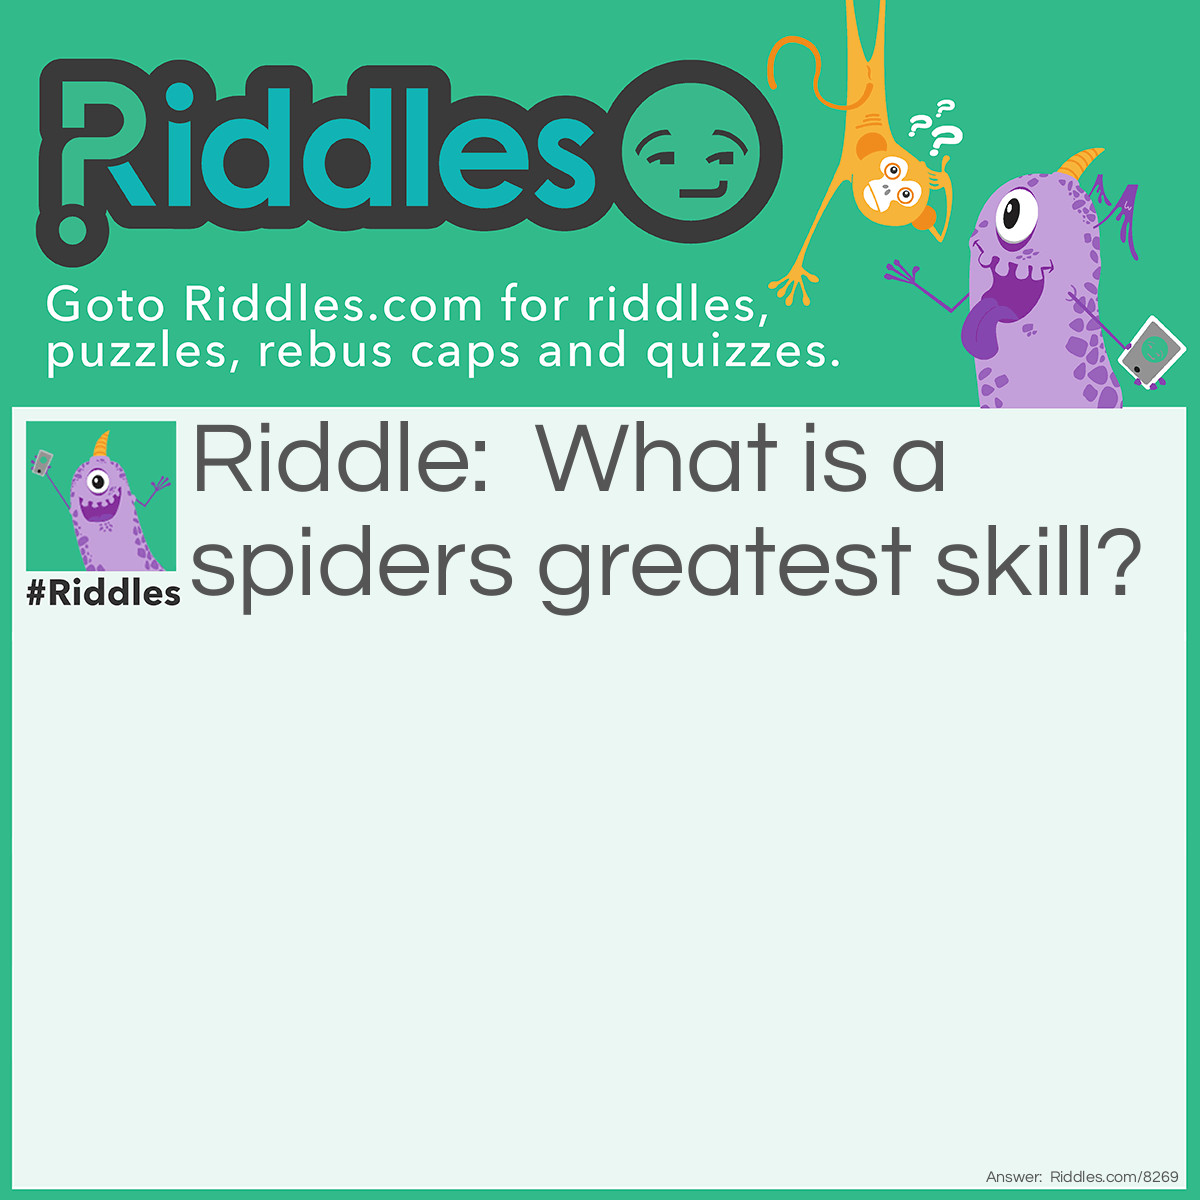 Riddle: What is a spiders greatest skill? Answer: They're excellent in web design!